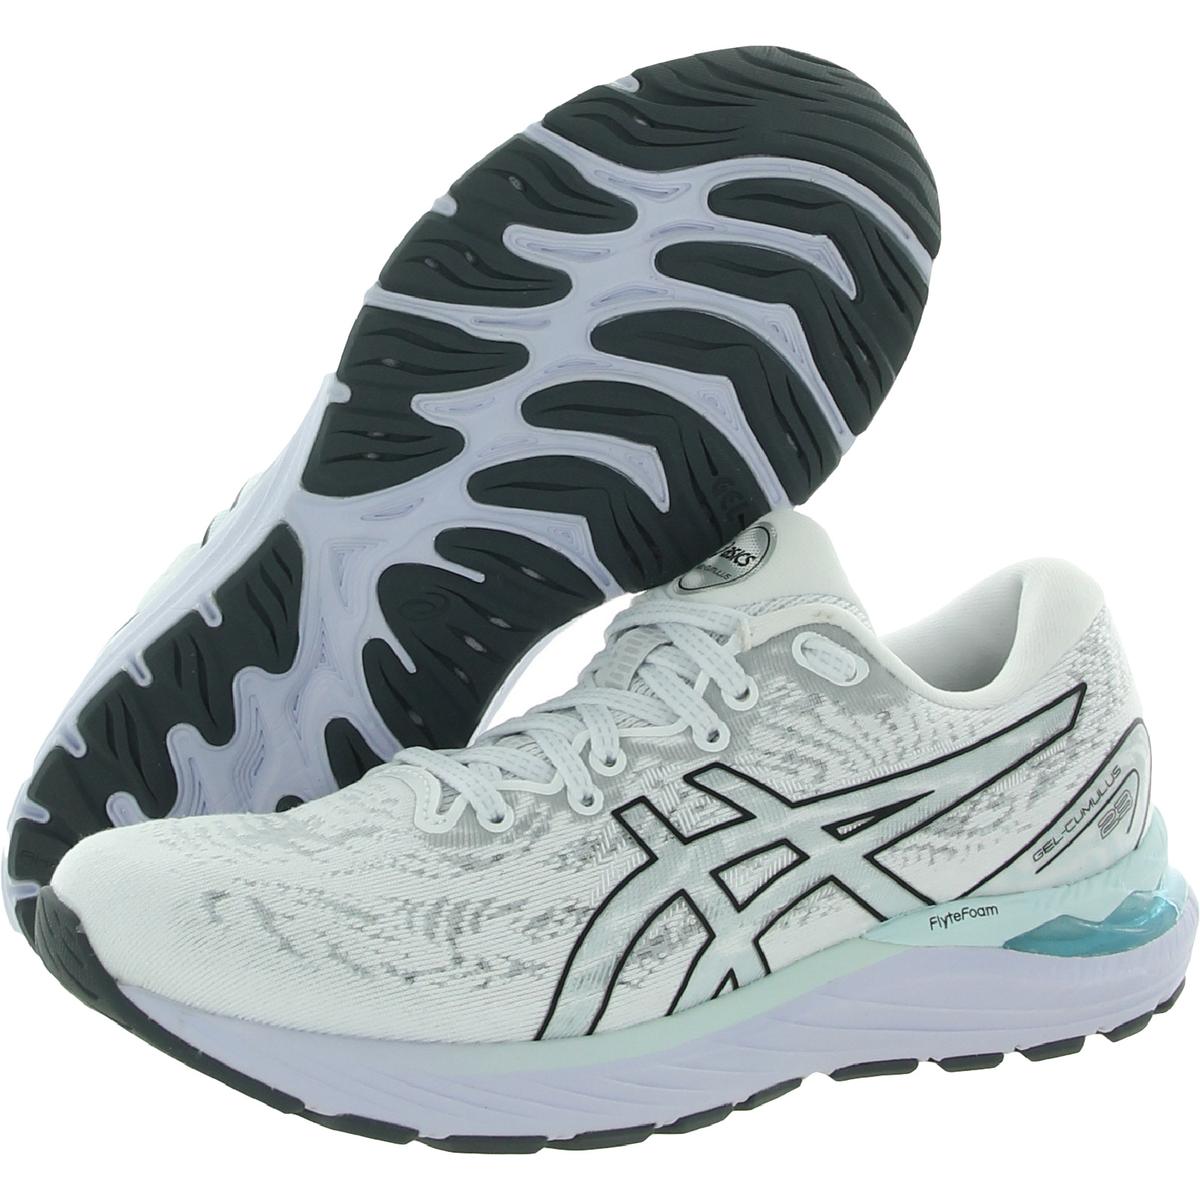 Asics Womens Gel-Cumulus 23 Fitness Gym Running Shoes Sneakers BHFO 5008